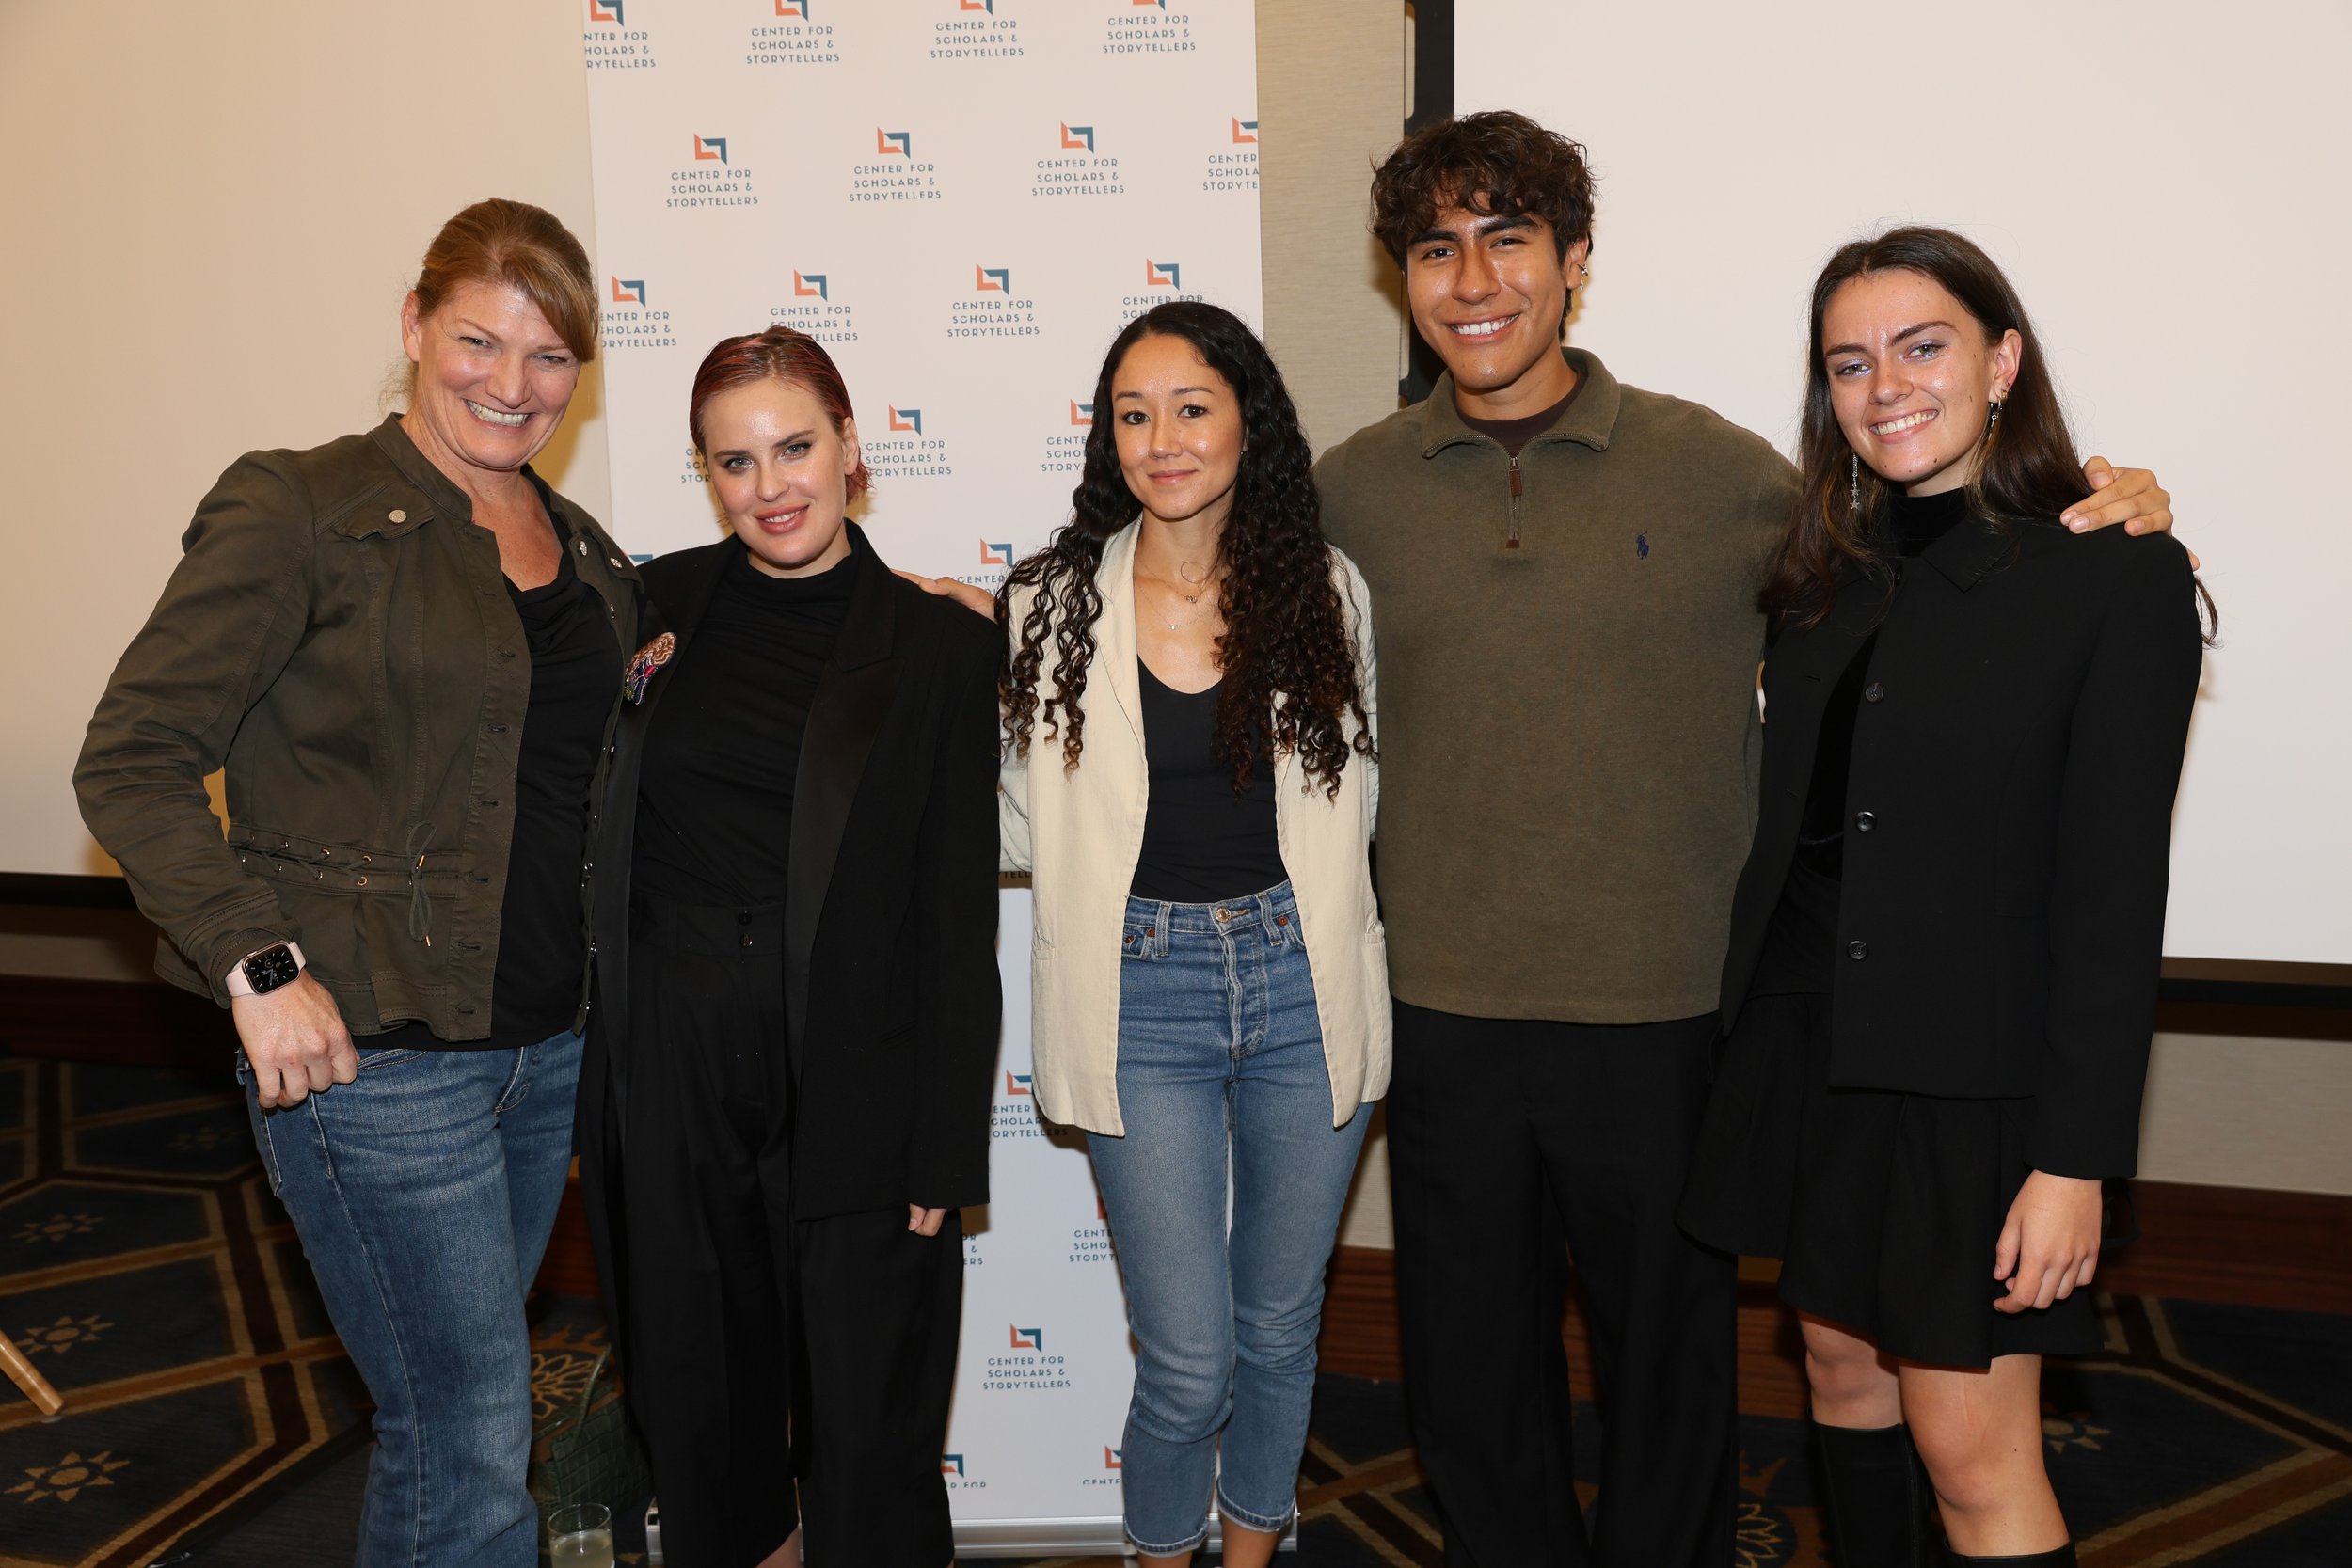  Gen Z and the Social Shift panelists- Dr. Candice Odgers (Professor of Psychological Sciene, UC Irvine), Tallulah Willis (Artist &amp; Entrepreneur), Raena Saddler (Director of Product, Youth Wellbeing &amp; Equity, Meta), Gael Aitor (Creator &amp; 